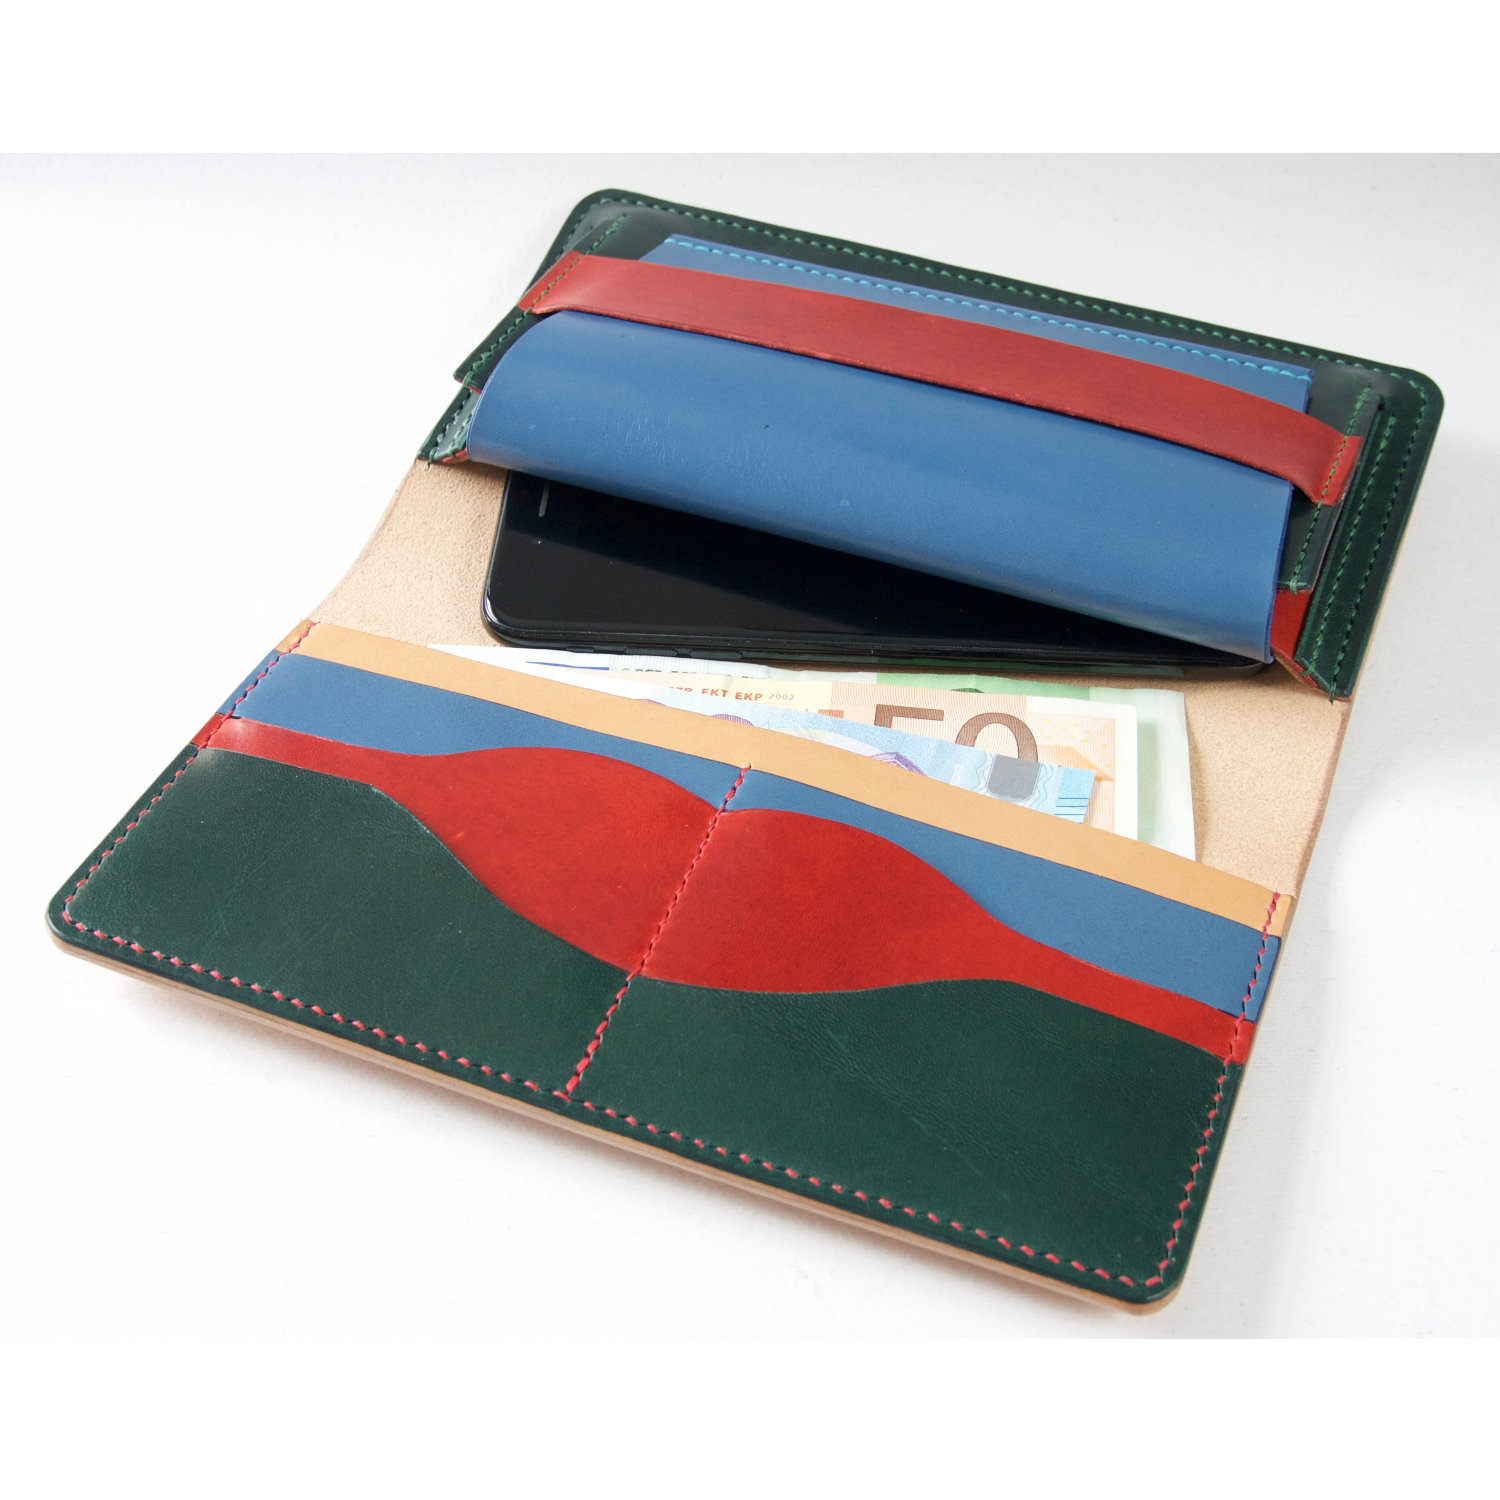 leather clutch envelope with mobile and bank notes inside